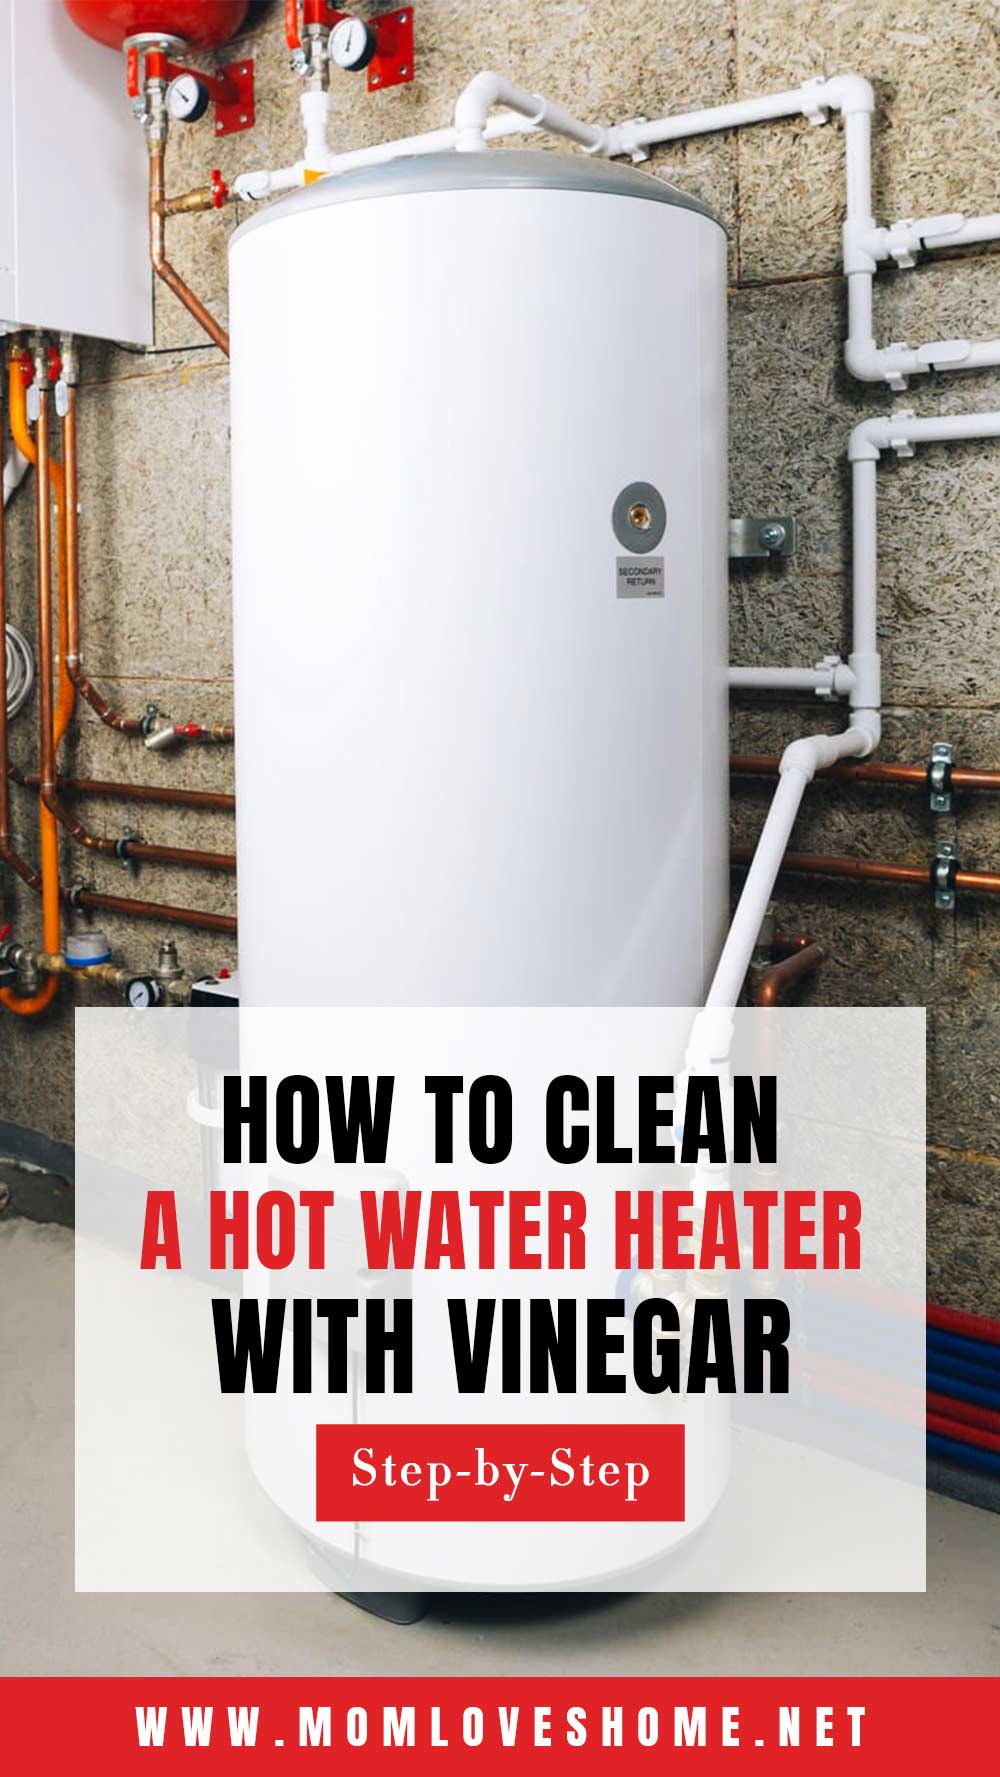 How to Clean a Hot Water Heater with Vinegar